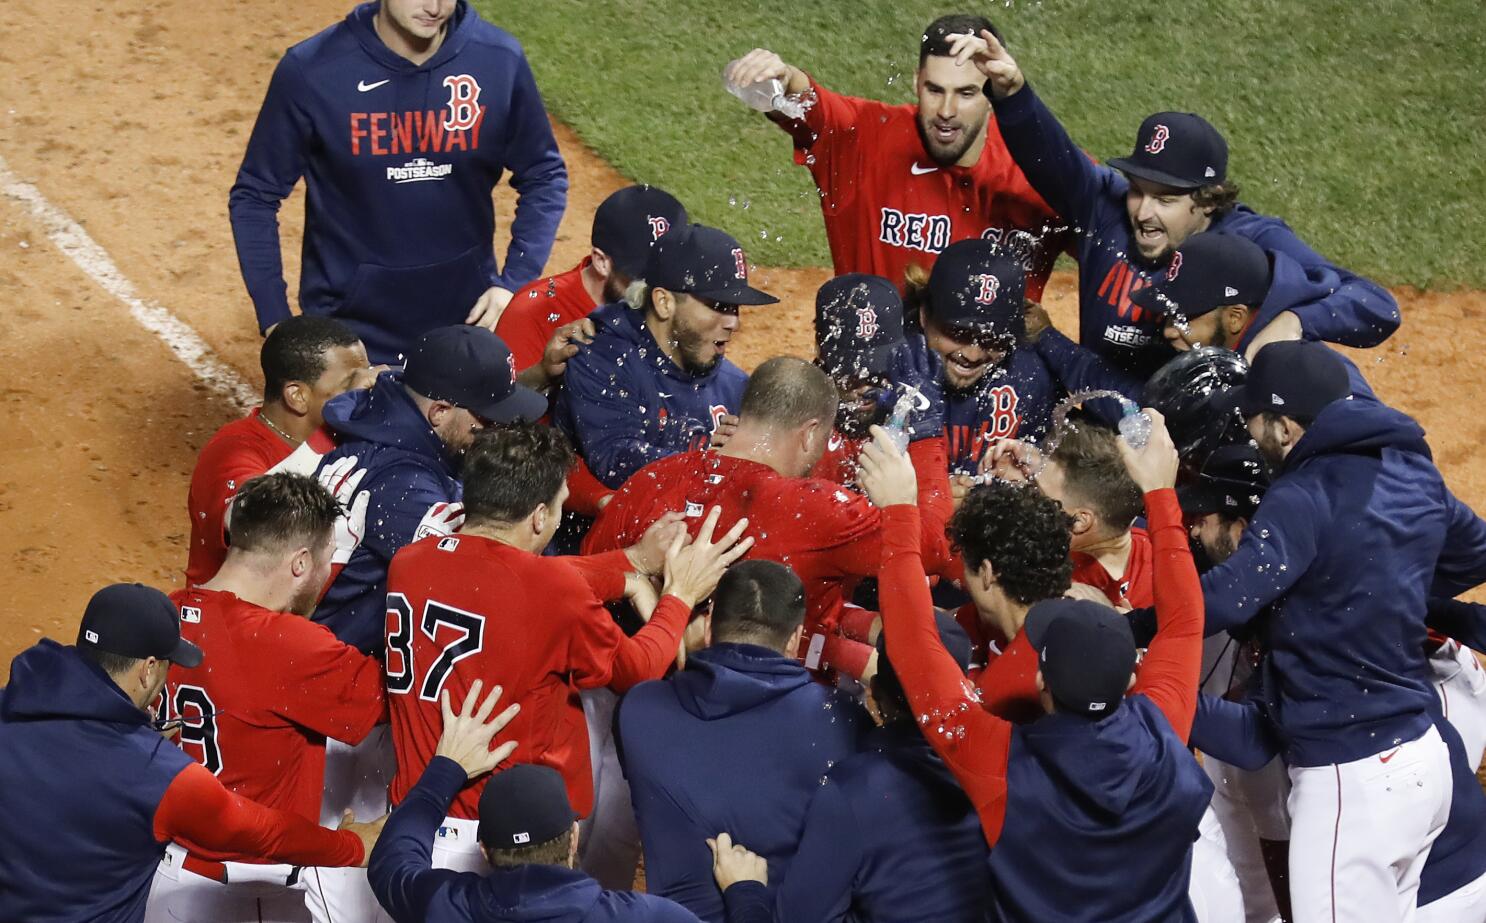 Over the Monster, a Boston Red Sox community